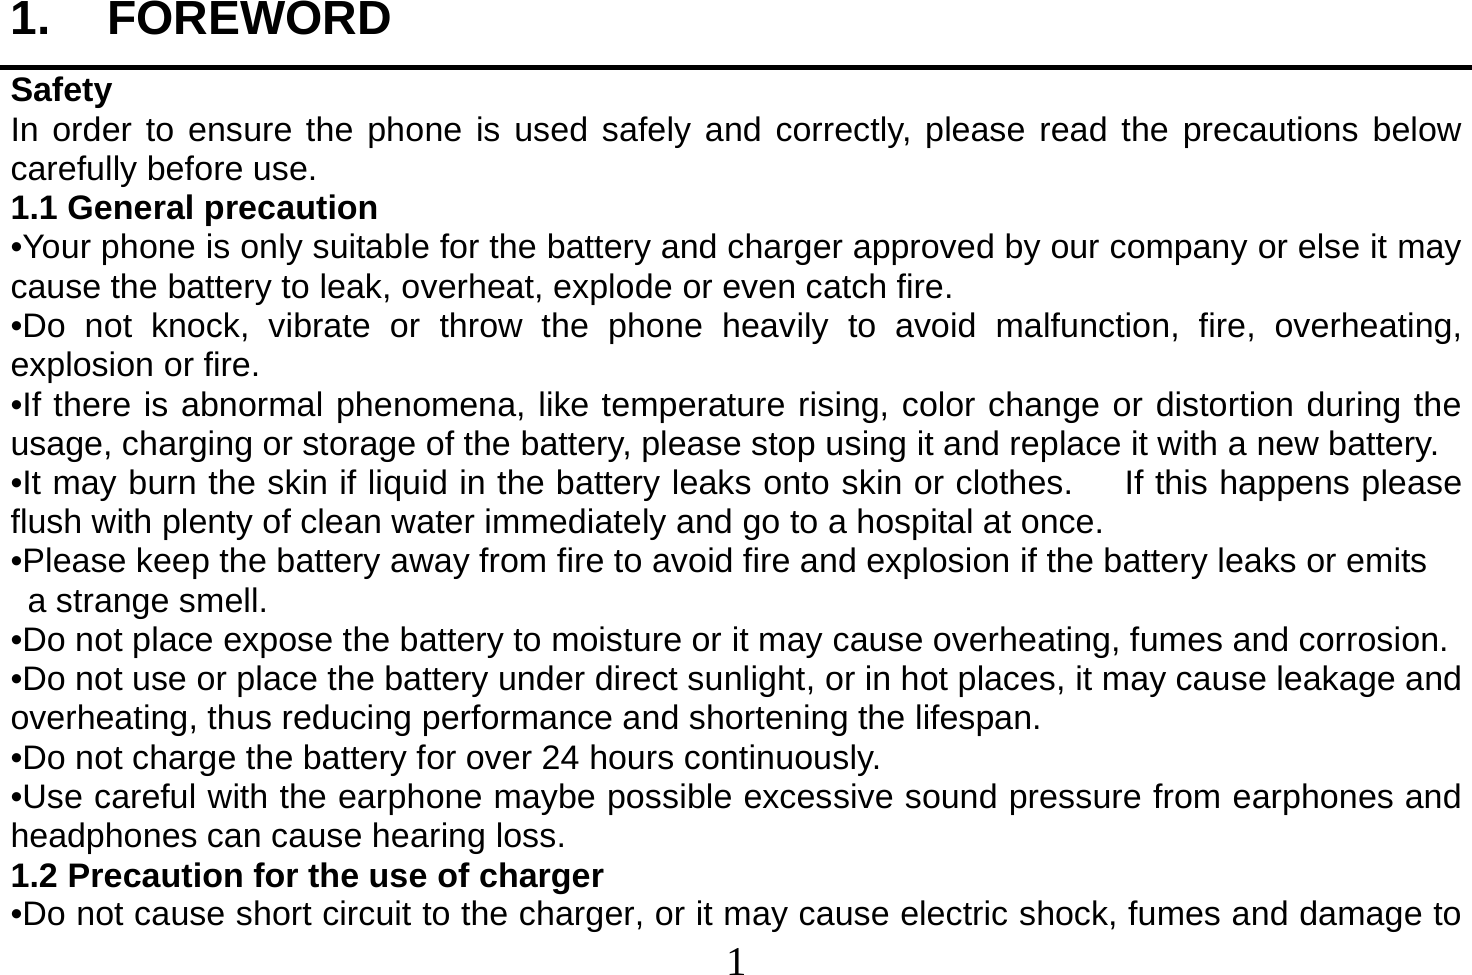  1  1. FOREWORD Safety In order to ensure the phone is used safely and correctly, please read the precautions below carefully before use. 1.1 General precaution •Your phone is only suitable for the battery and charger approved by our company or else it may cause the battery to leak, overheat, explode or even catch fire. •Do not knock, vibrate or throw the phone heavily to avoid malfunction, fire, overheating, explosion or fire. •If there is abnormal phenomena, like temperature rising, color change or distortion during the usage, charging or storage of the battery, please stop using it and replace it with a new battery. •It may burn the skin if liquid in the battery leaks onto skin or clothes.      If this happens please flush with plenty of clean water immediately and go to a hospital at once. •Please keep the battery away from fire to avoid fire and explosion if the battery leaks or emits   a strange smell. •Do not place expose the battery to moisture or it may cause overheating, fumes and corrosion. •Do not use or place the battery under direct sunlight, or in hot places, it may cause leakage and overheating, thus reducing performance and shortening the lifespan. •Do not charge the battery for over 24 hours continuously. •Use careful with the earphone maybe possible excessive sound pressure from earphones and headphones can cause hearing loss. 1.2 Precaution for the use of charger •Do not cause short circuit to the charger, or it may cause electric shock, fumes and damage to 